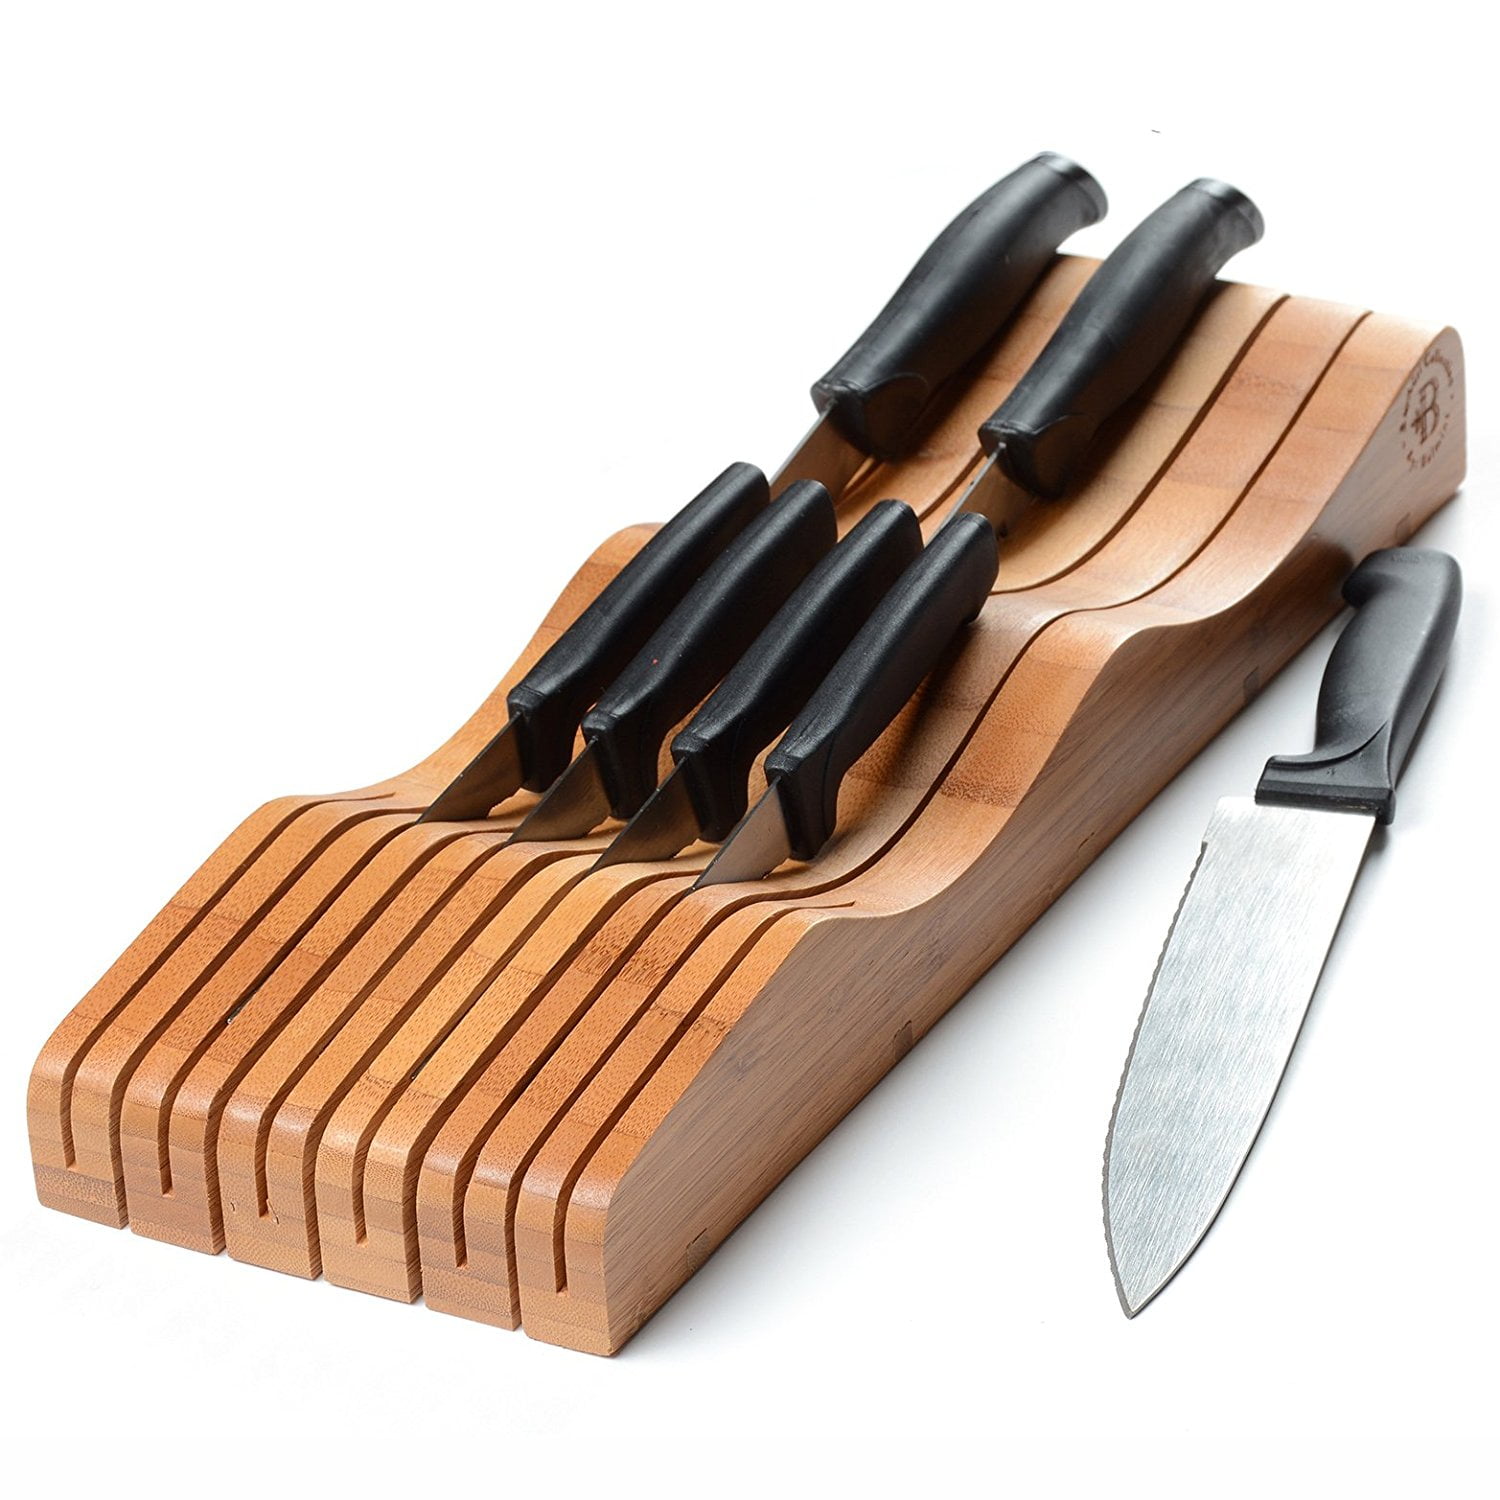 In Drawer Bamboo Knife Block And Cutlery Storage Organizer, Holds